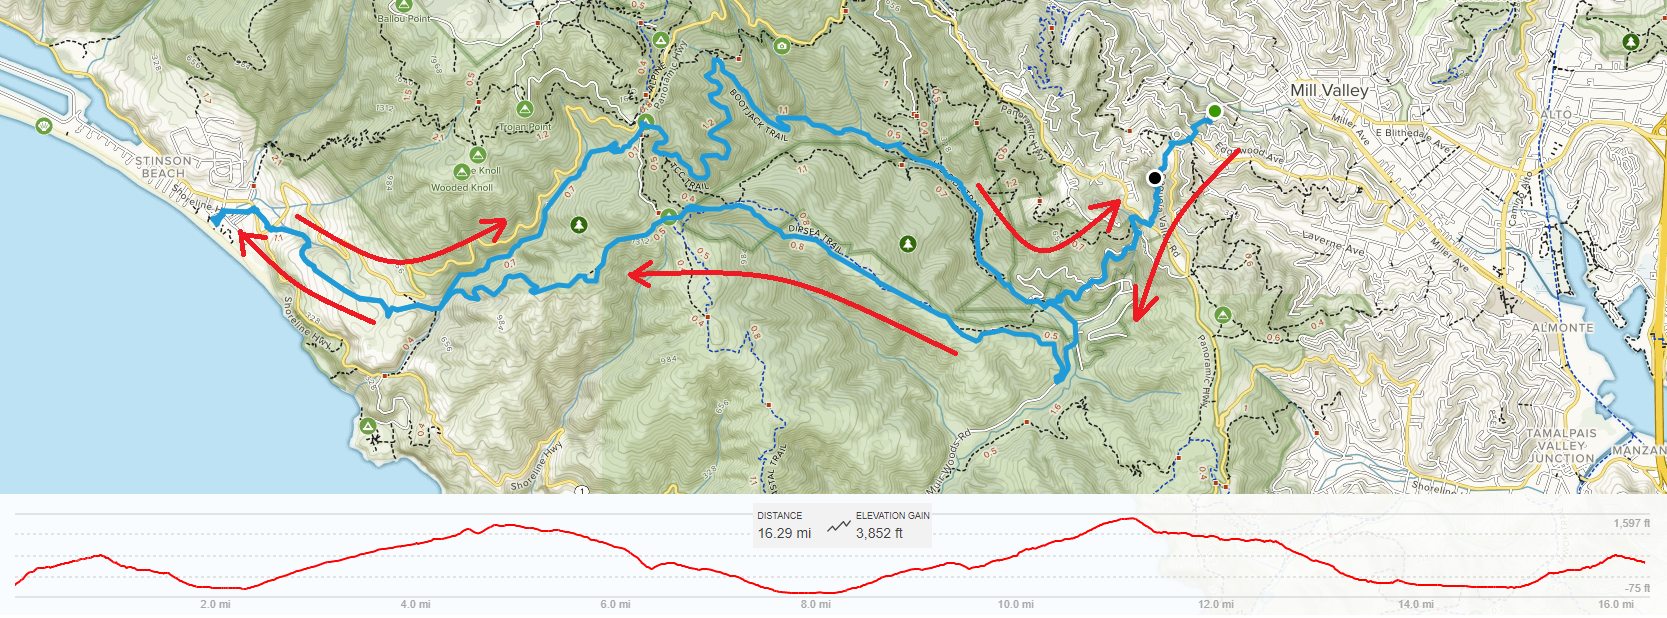 double_dipsea_trail_map.png